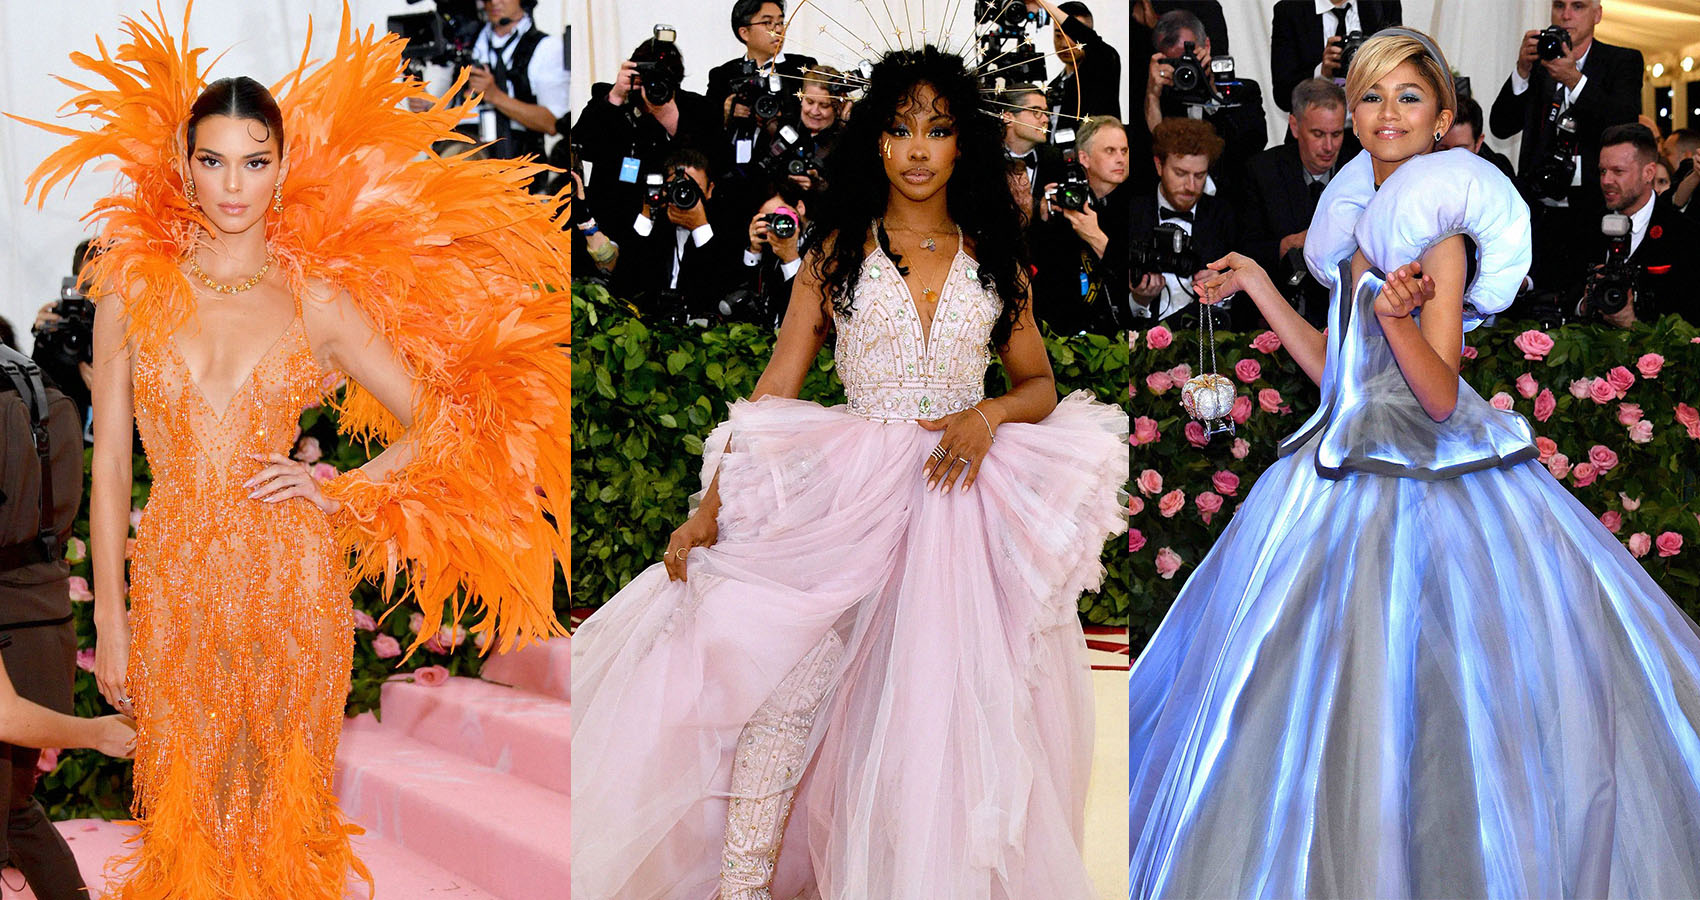 Where to Watch the 2021 Met Gala Where to Watch the 2021 Met Gala